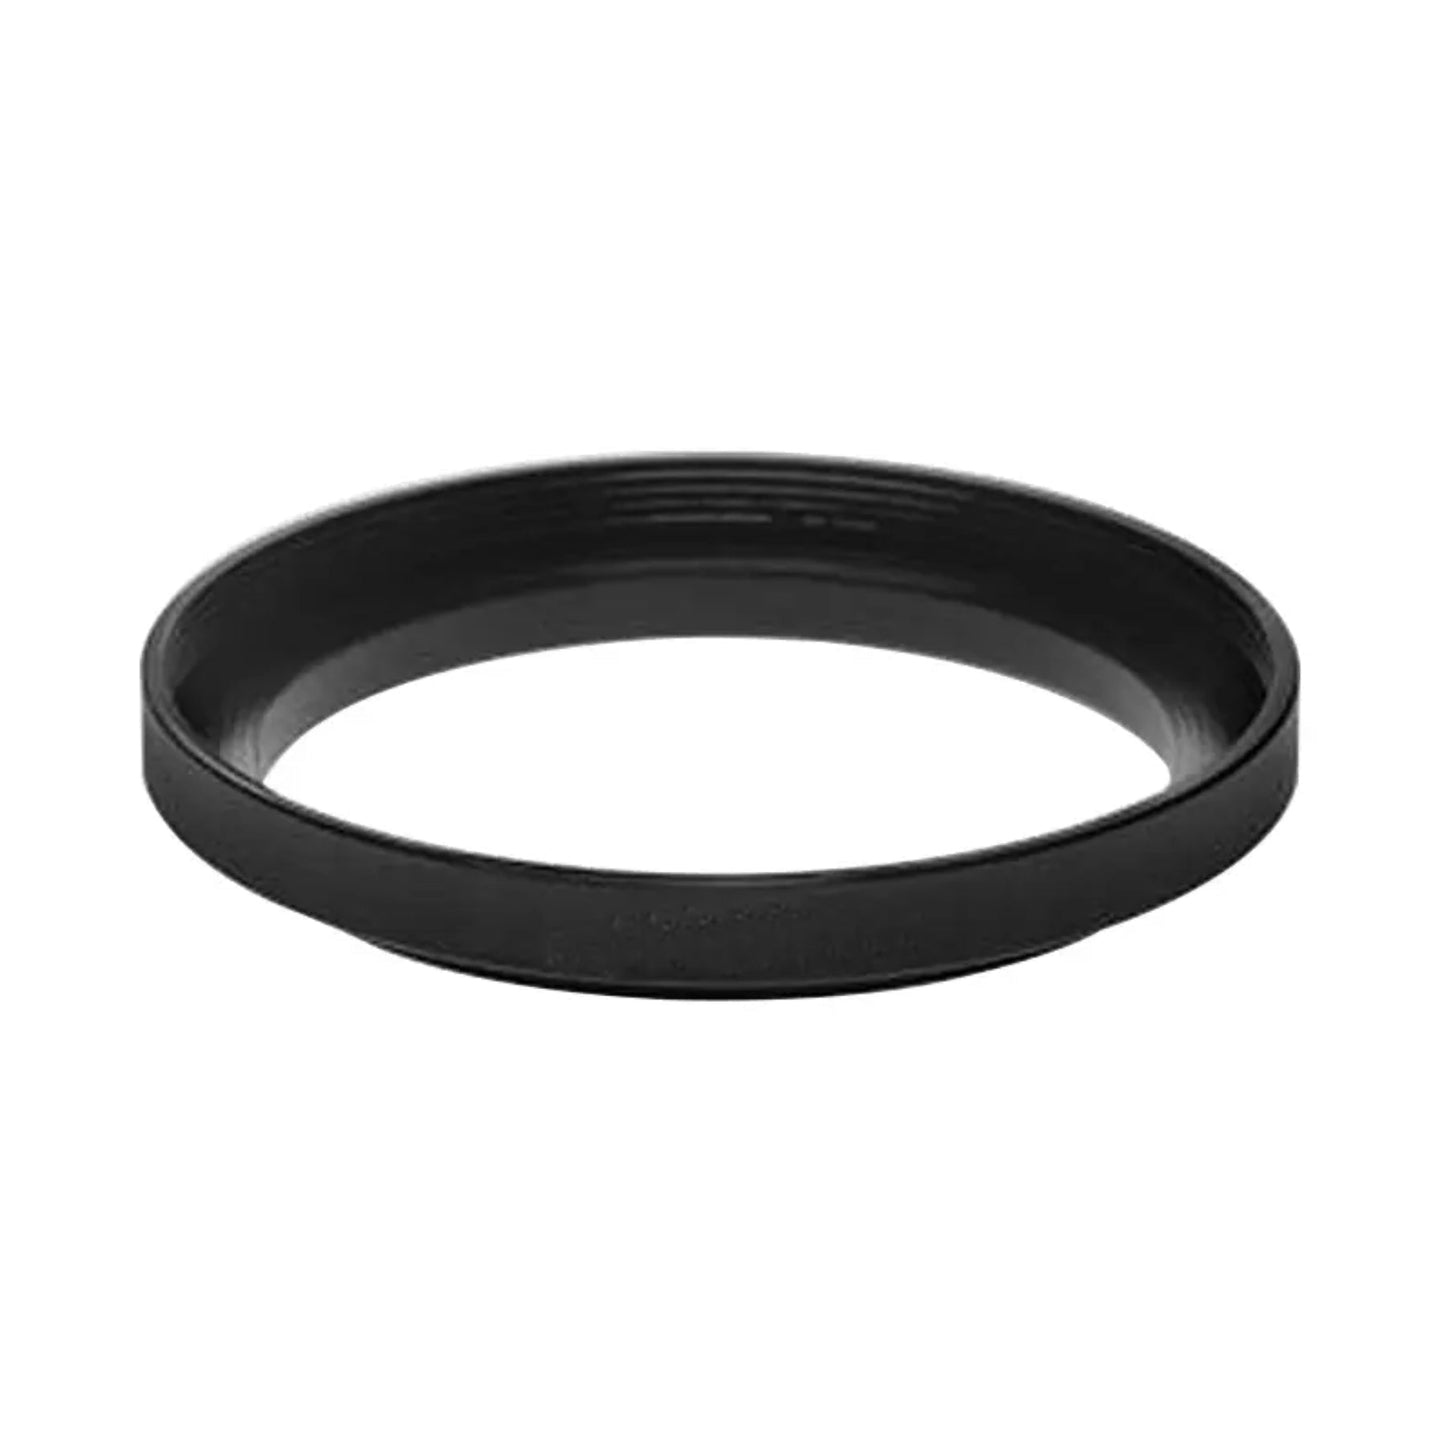 Hire Step Up Ring - 77 to 82mm at Topic Rentals